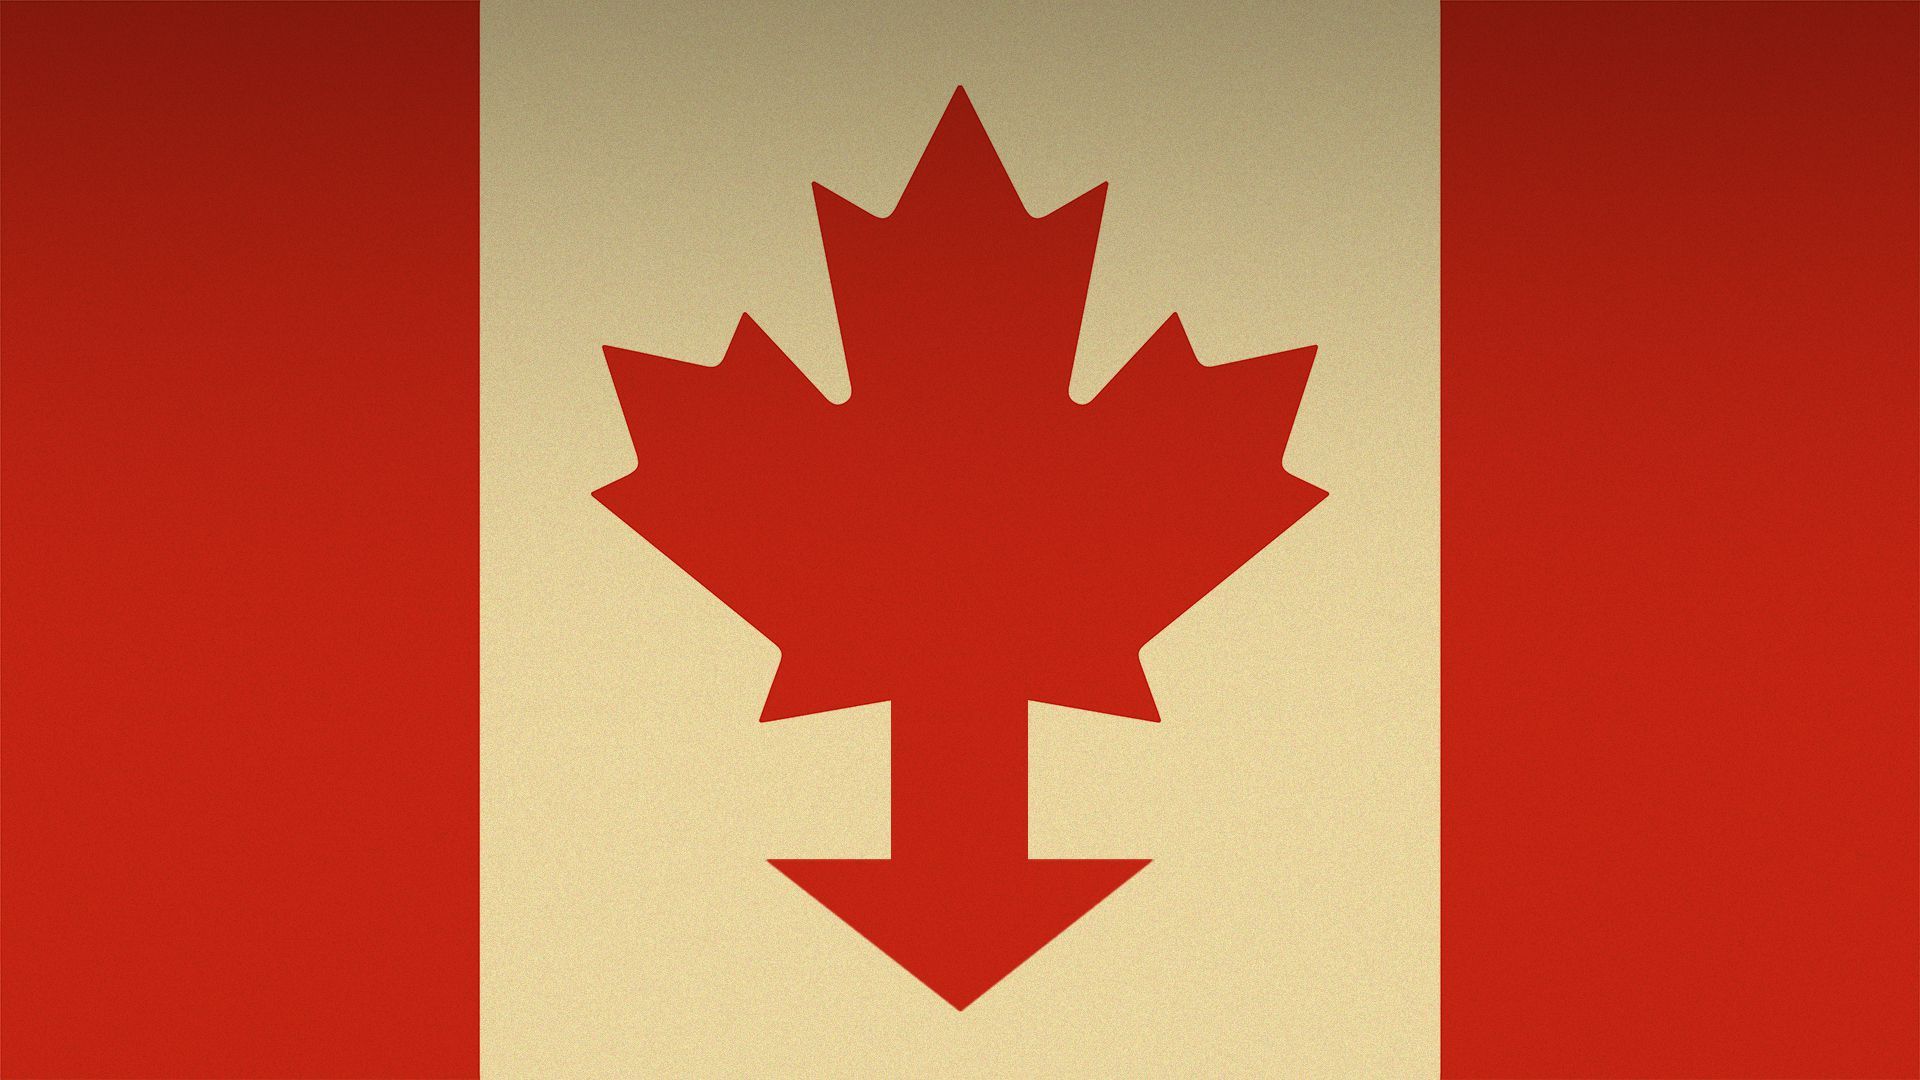 Illustration of the Canadian flag with a maple leaf appearing to have a downward pointing arrow for a stem 